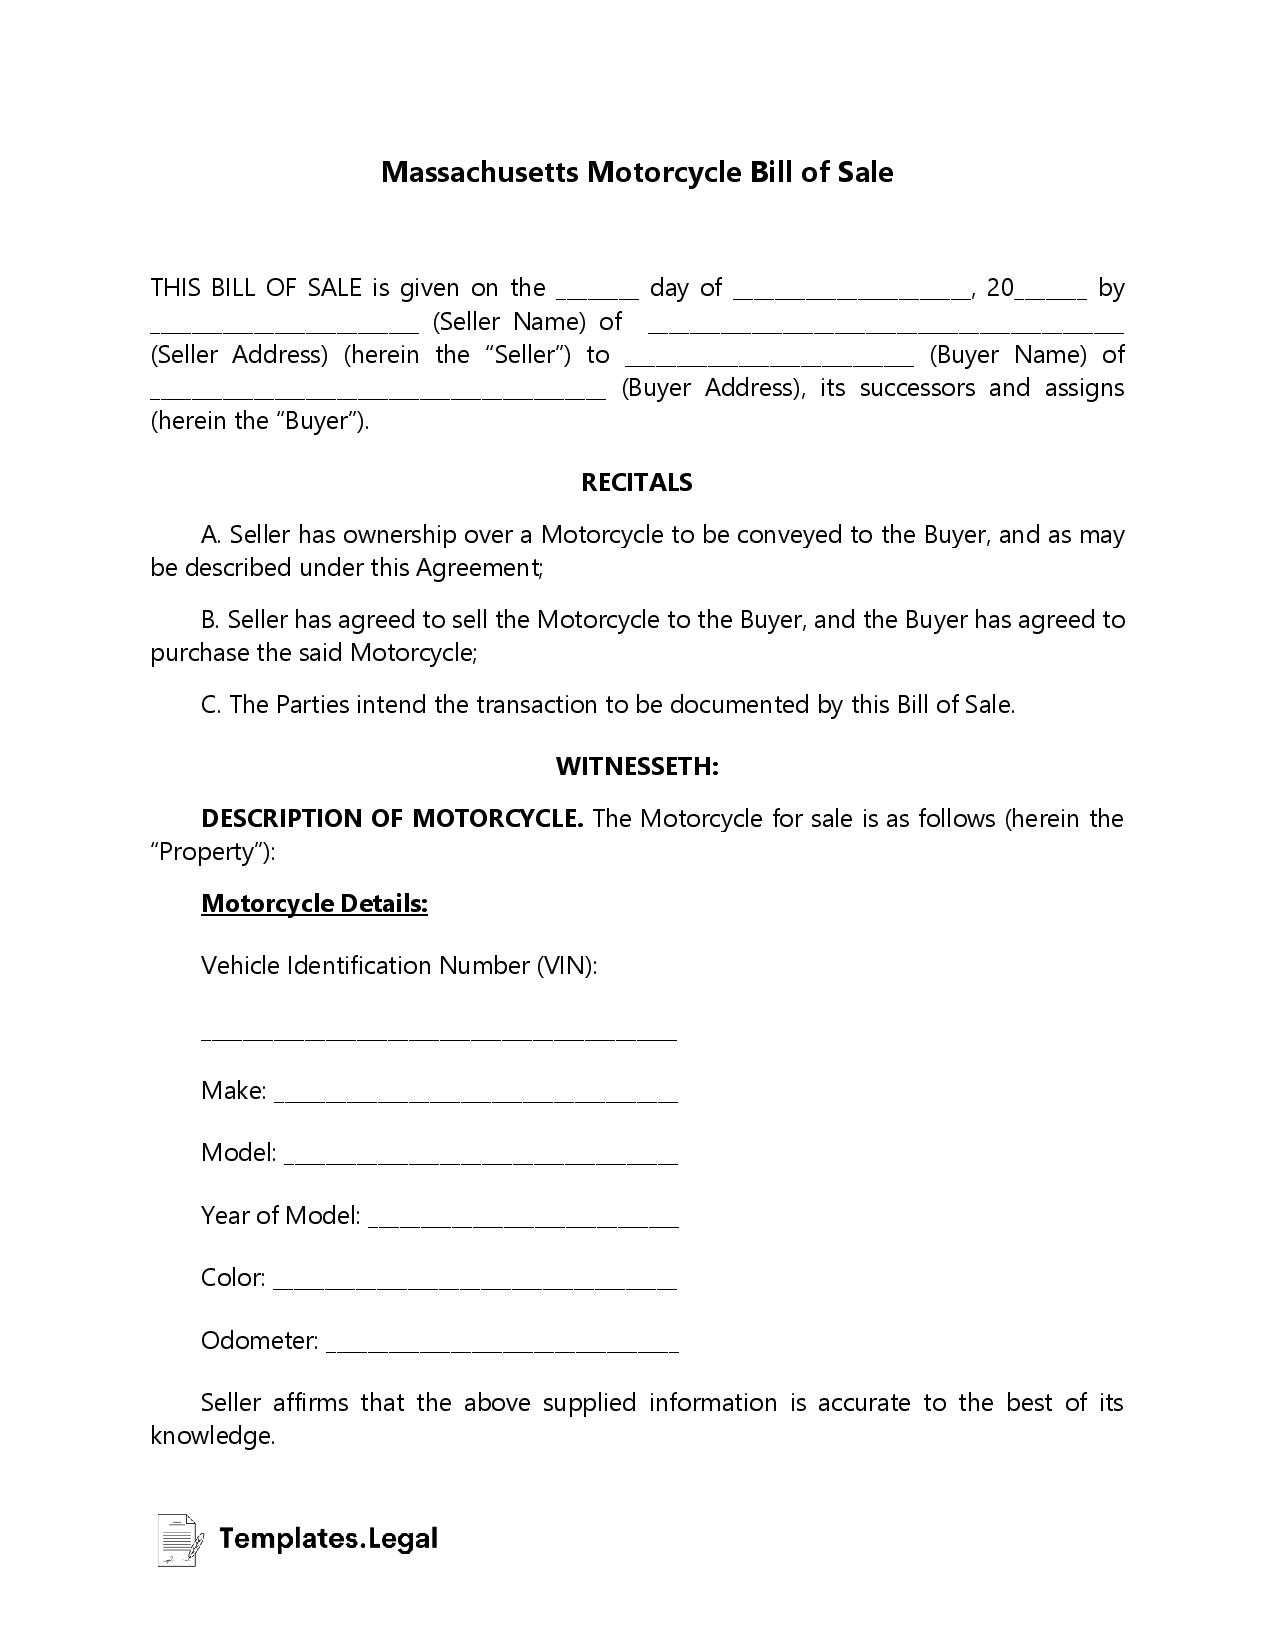 Massachusetts Motorcycle Bill of Sale - Templates.Legal